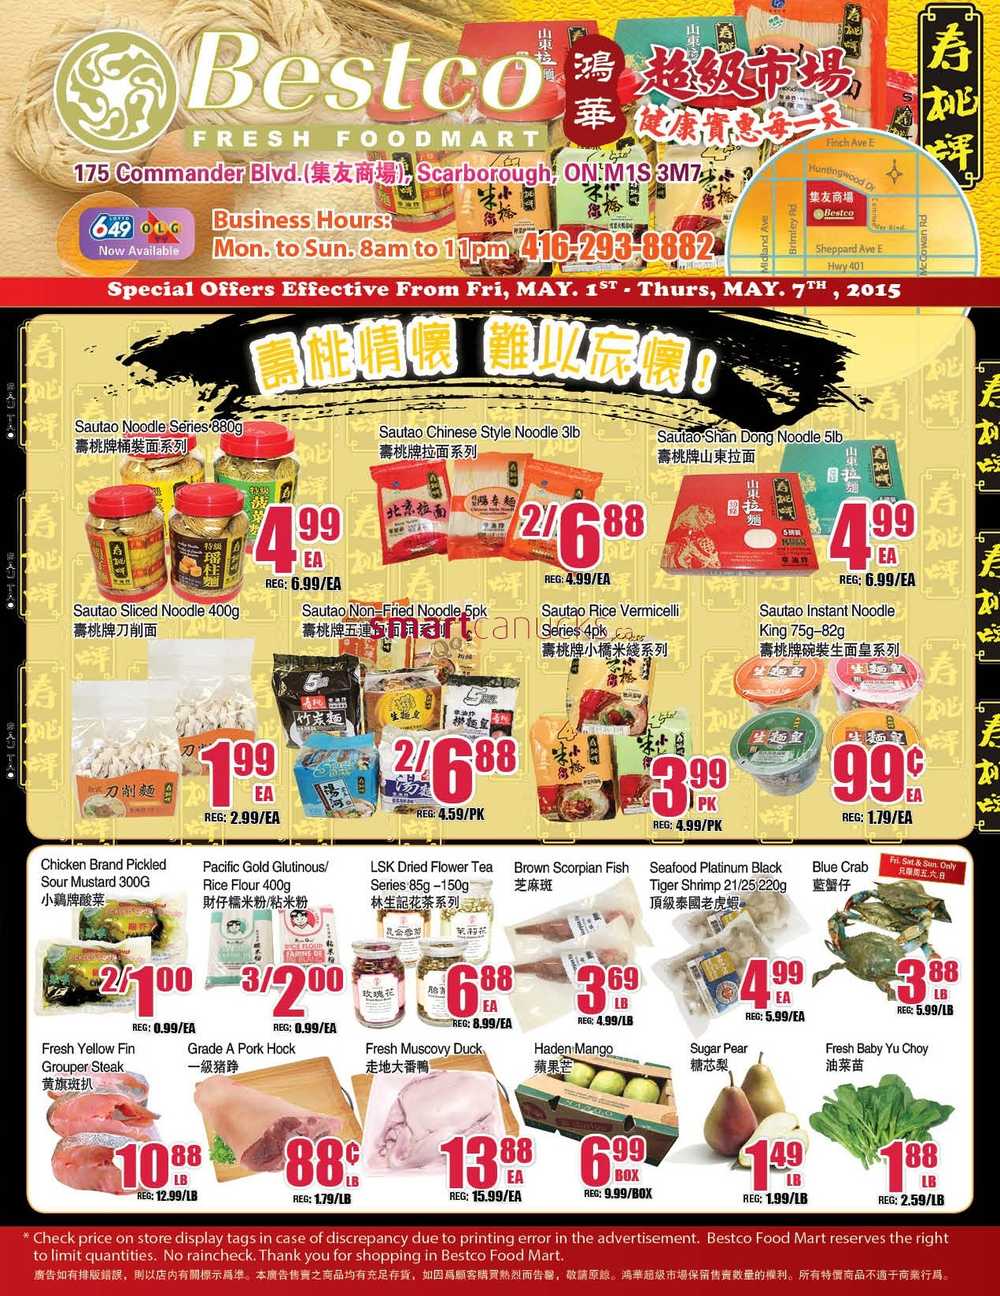 BestCo Food Mart (Scarborough) Flyer May 1 to 7